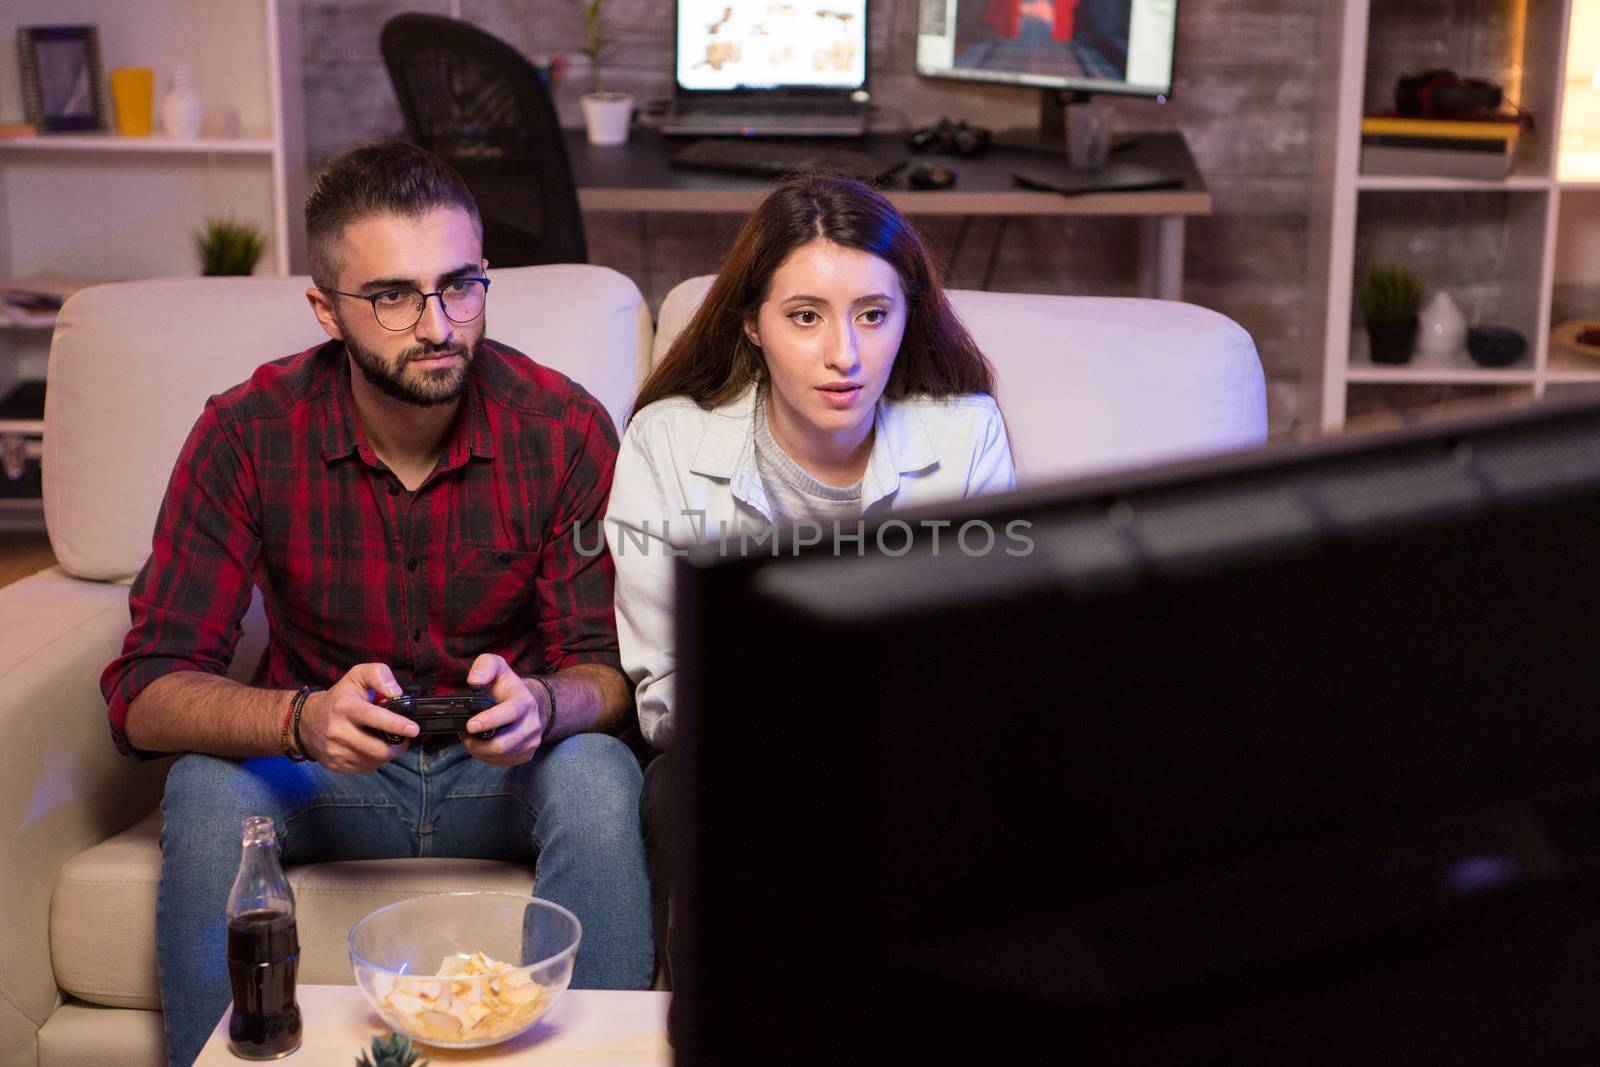 Joyful young couple playing video games on television by DCStudio